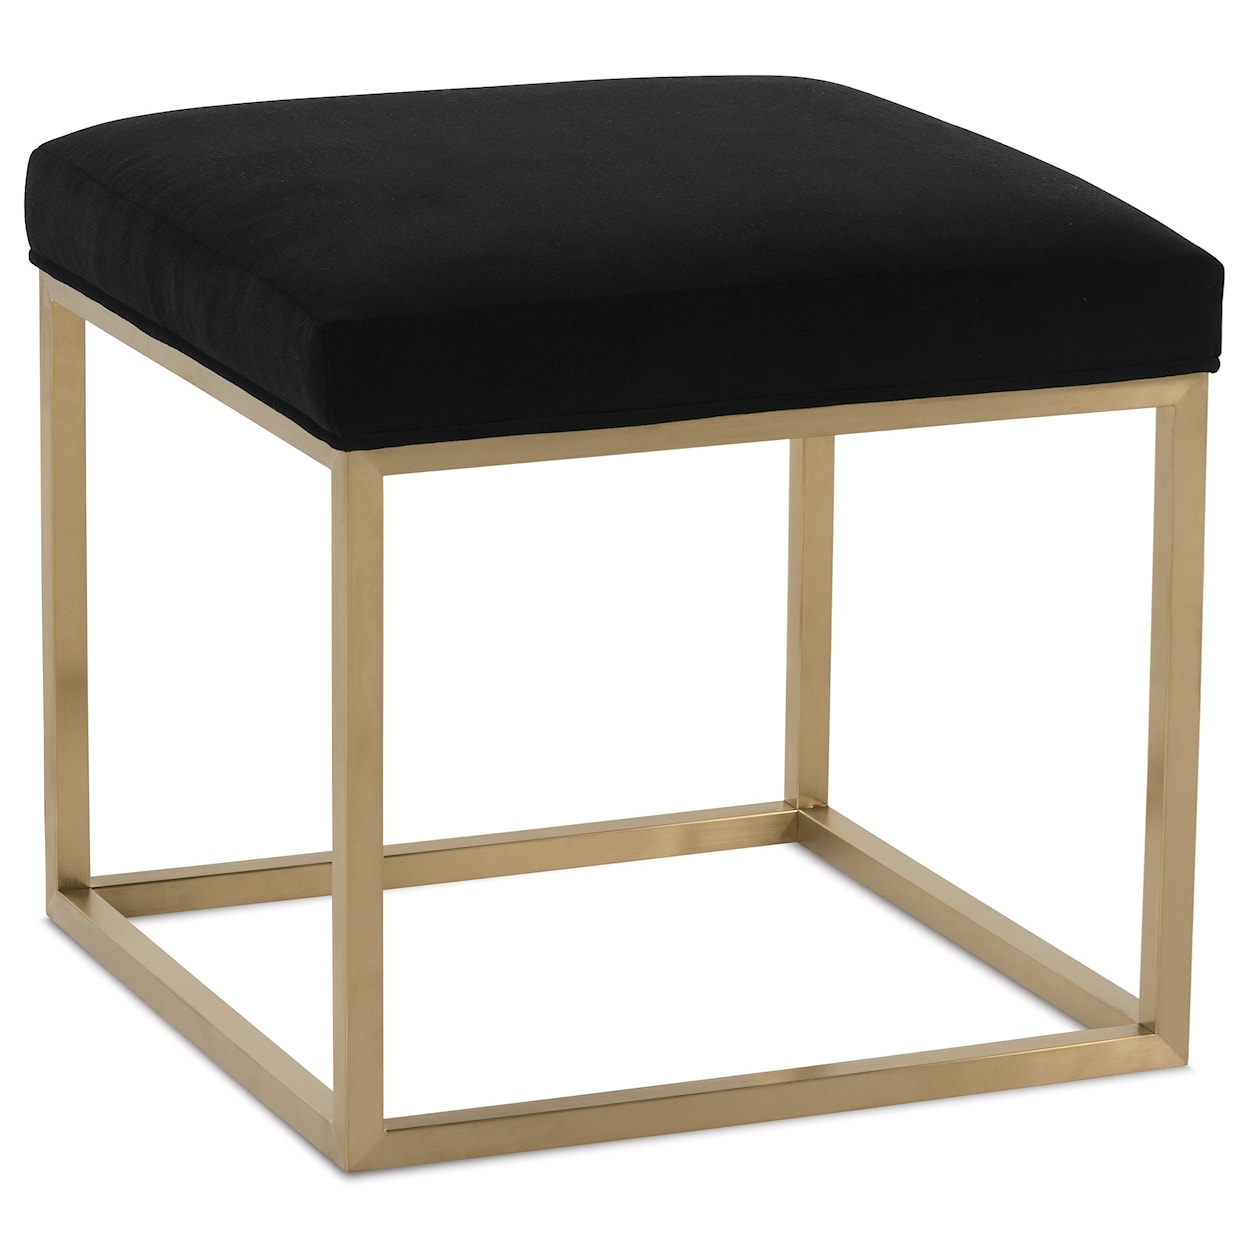 Rowe Percy Contemporary Accent Cube Ottoman